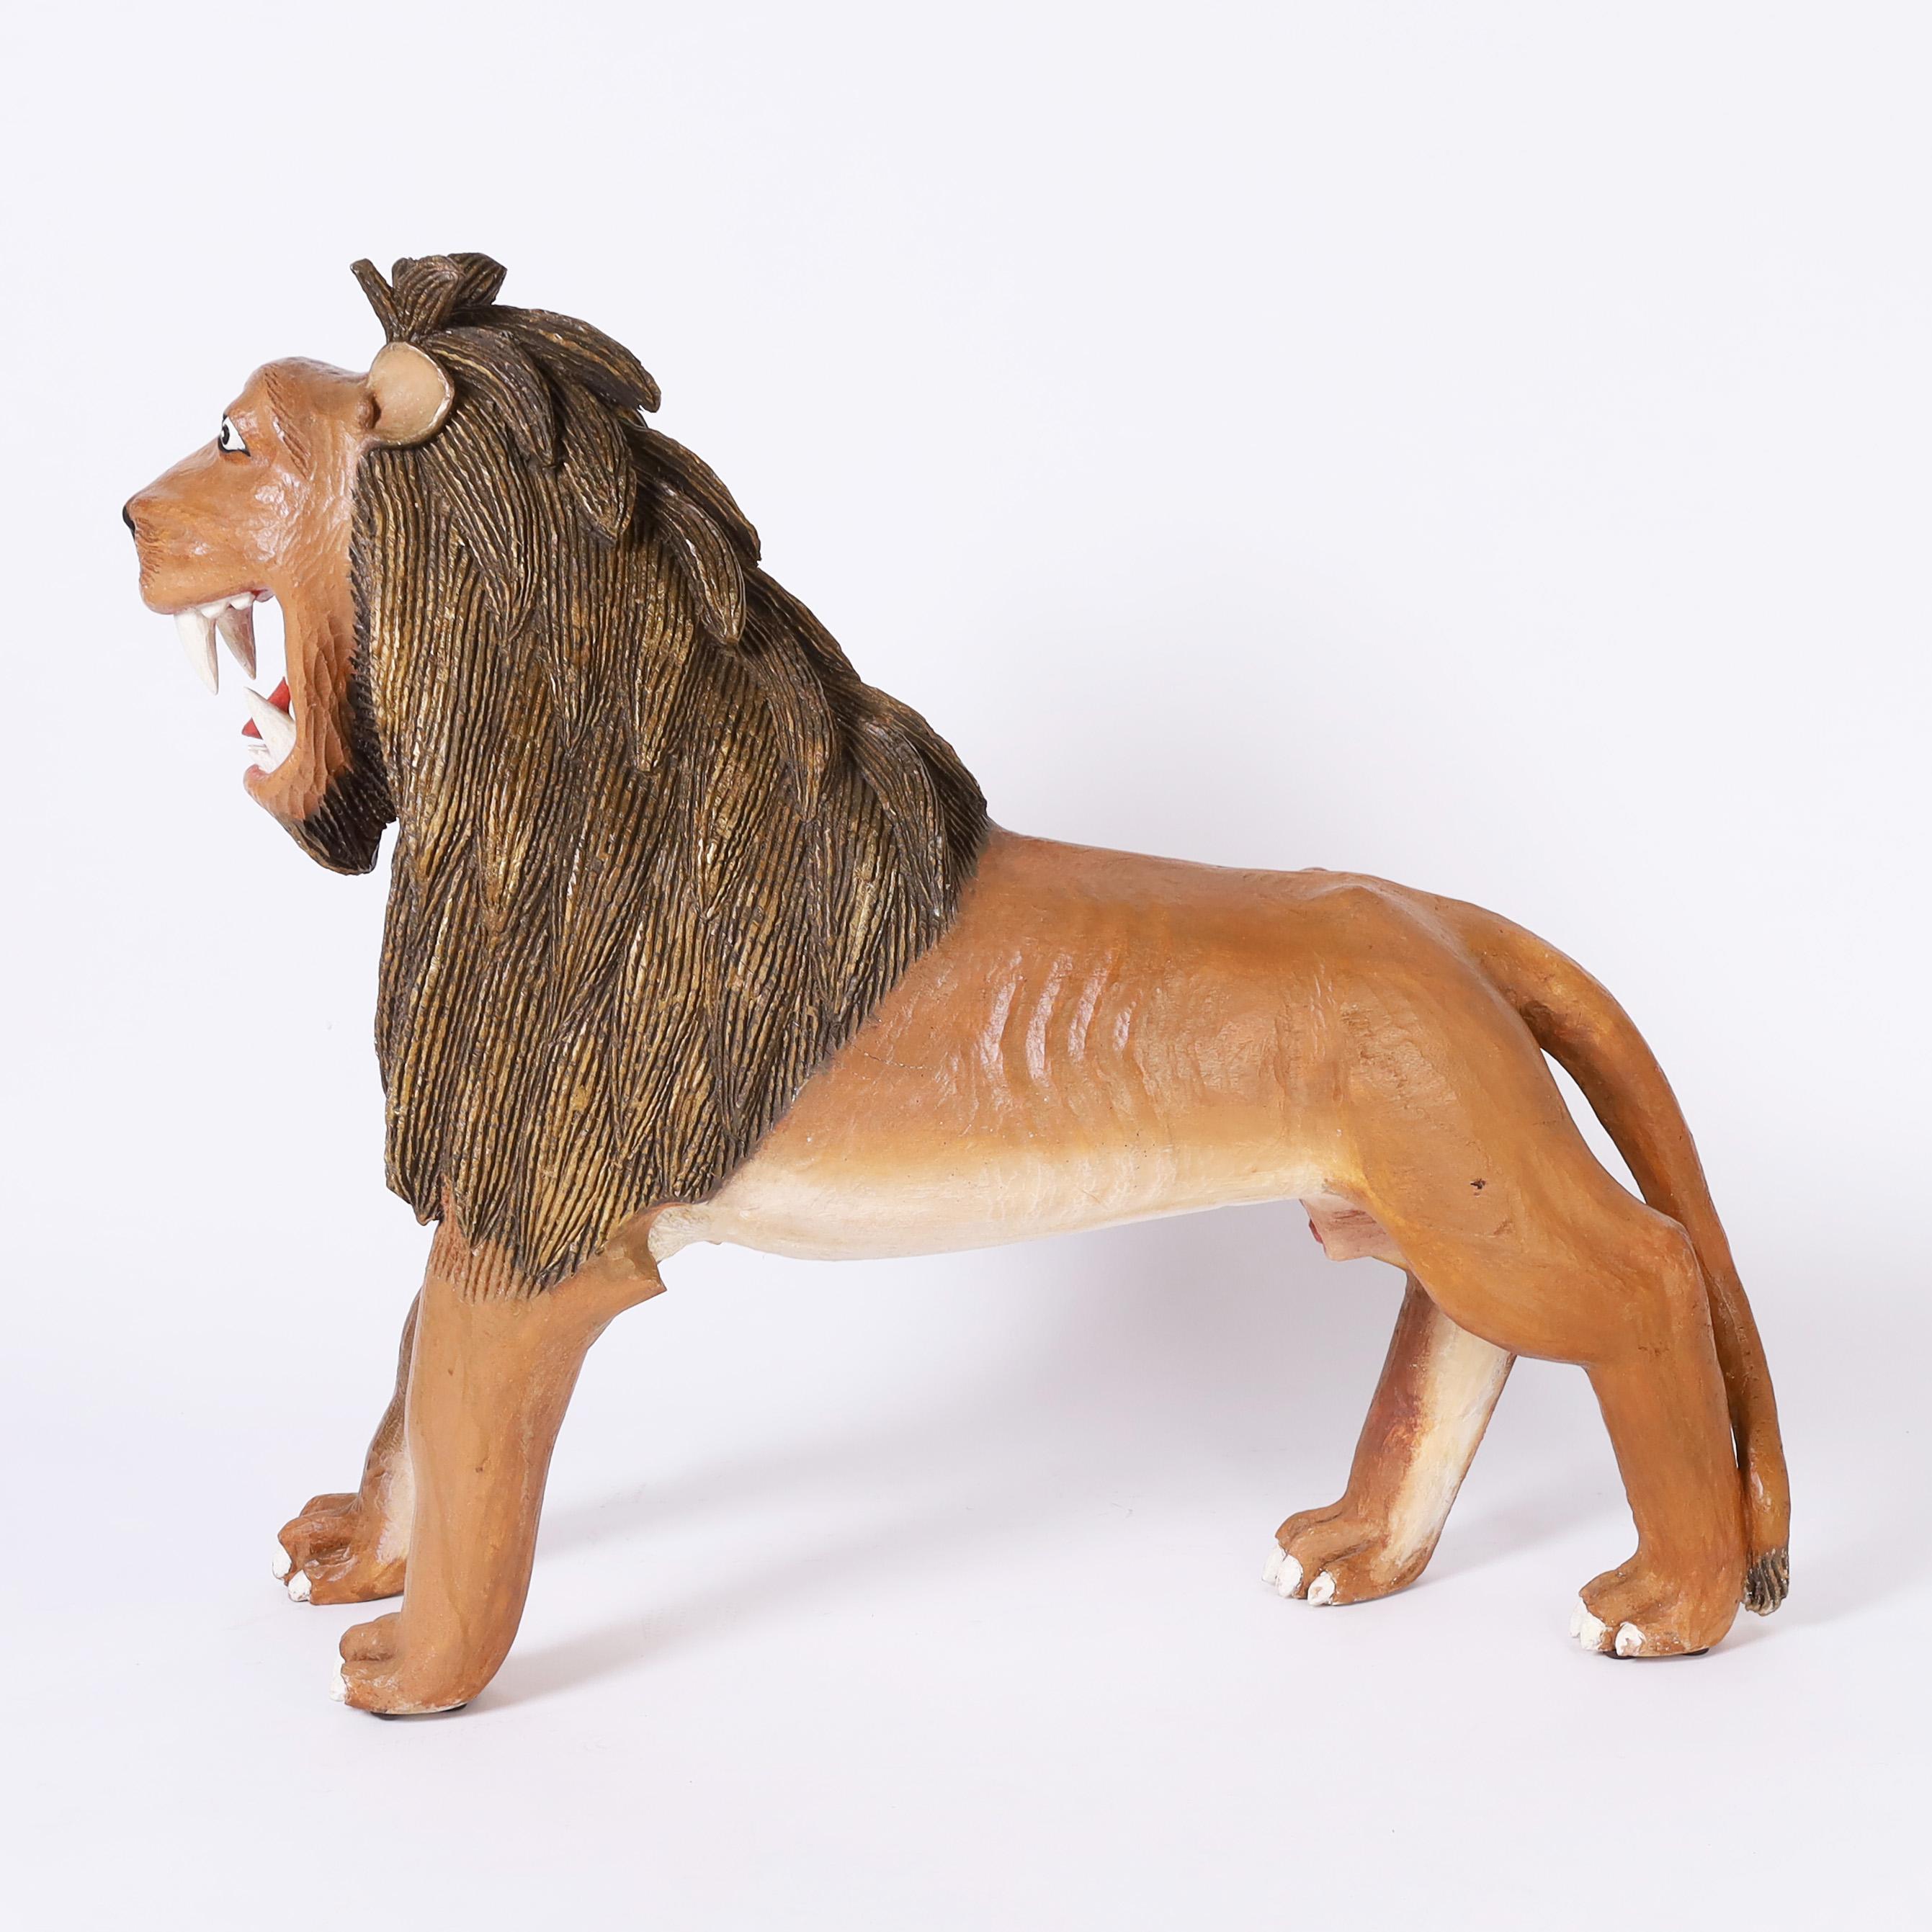 Eye catching whimsical lion sculpture or figure, hand carved, in a naive style, paint decorated and caught in mid roar.